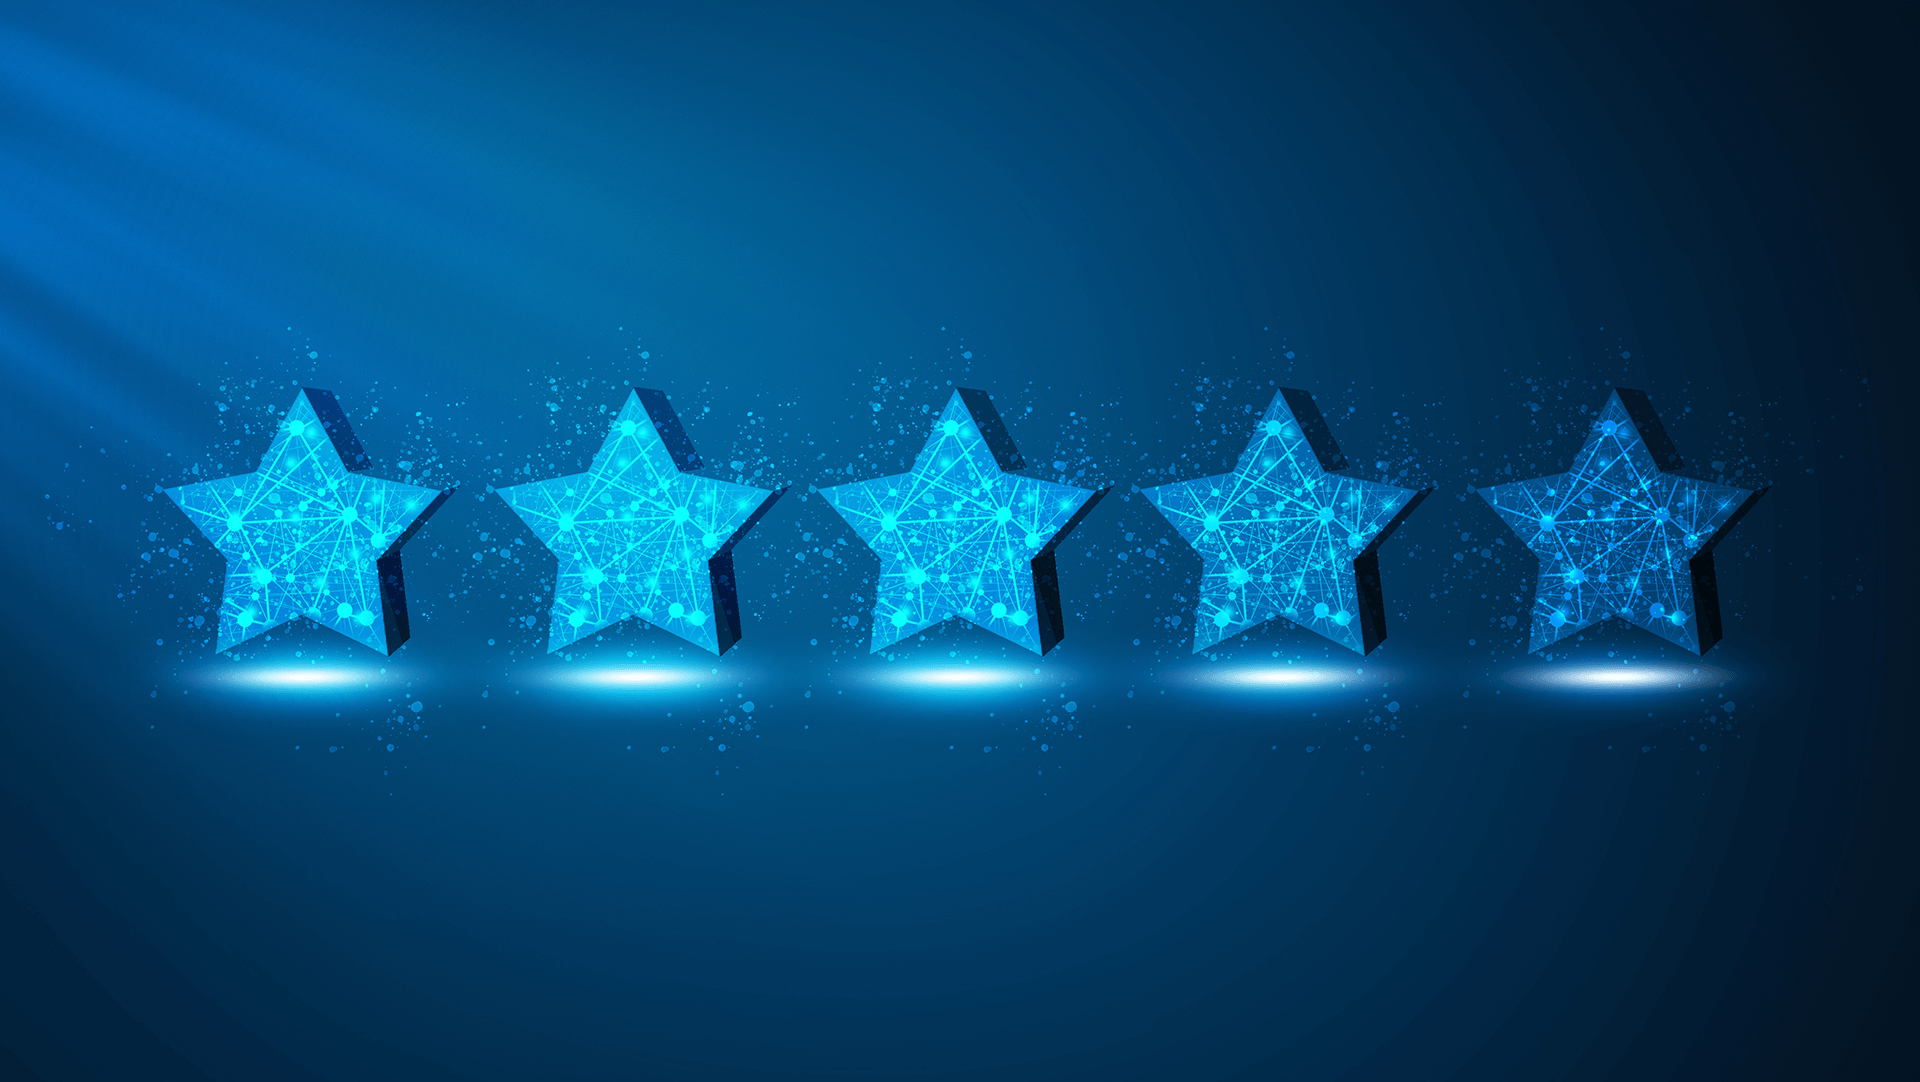 Five glowing blue stars with a digital network structure against a dark blue background, symbolizing high-quality rating or futuristic excellence.